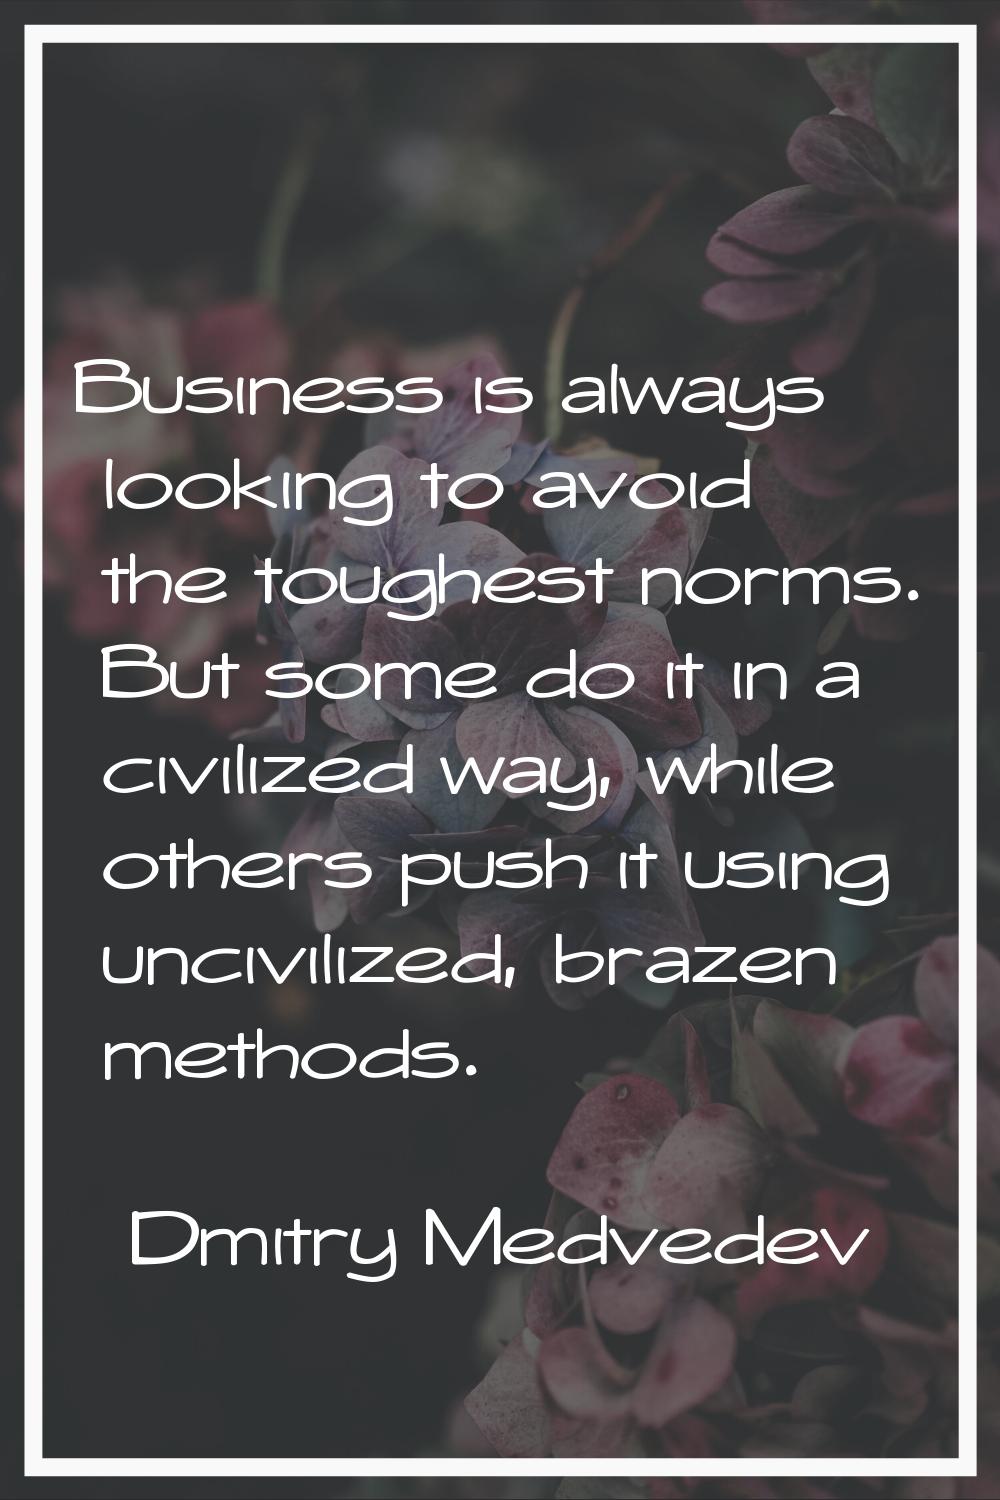 Business is always looking to avoid the toughest norms. But some do it in a civilized way, while ot